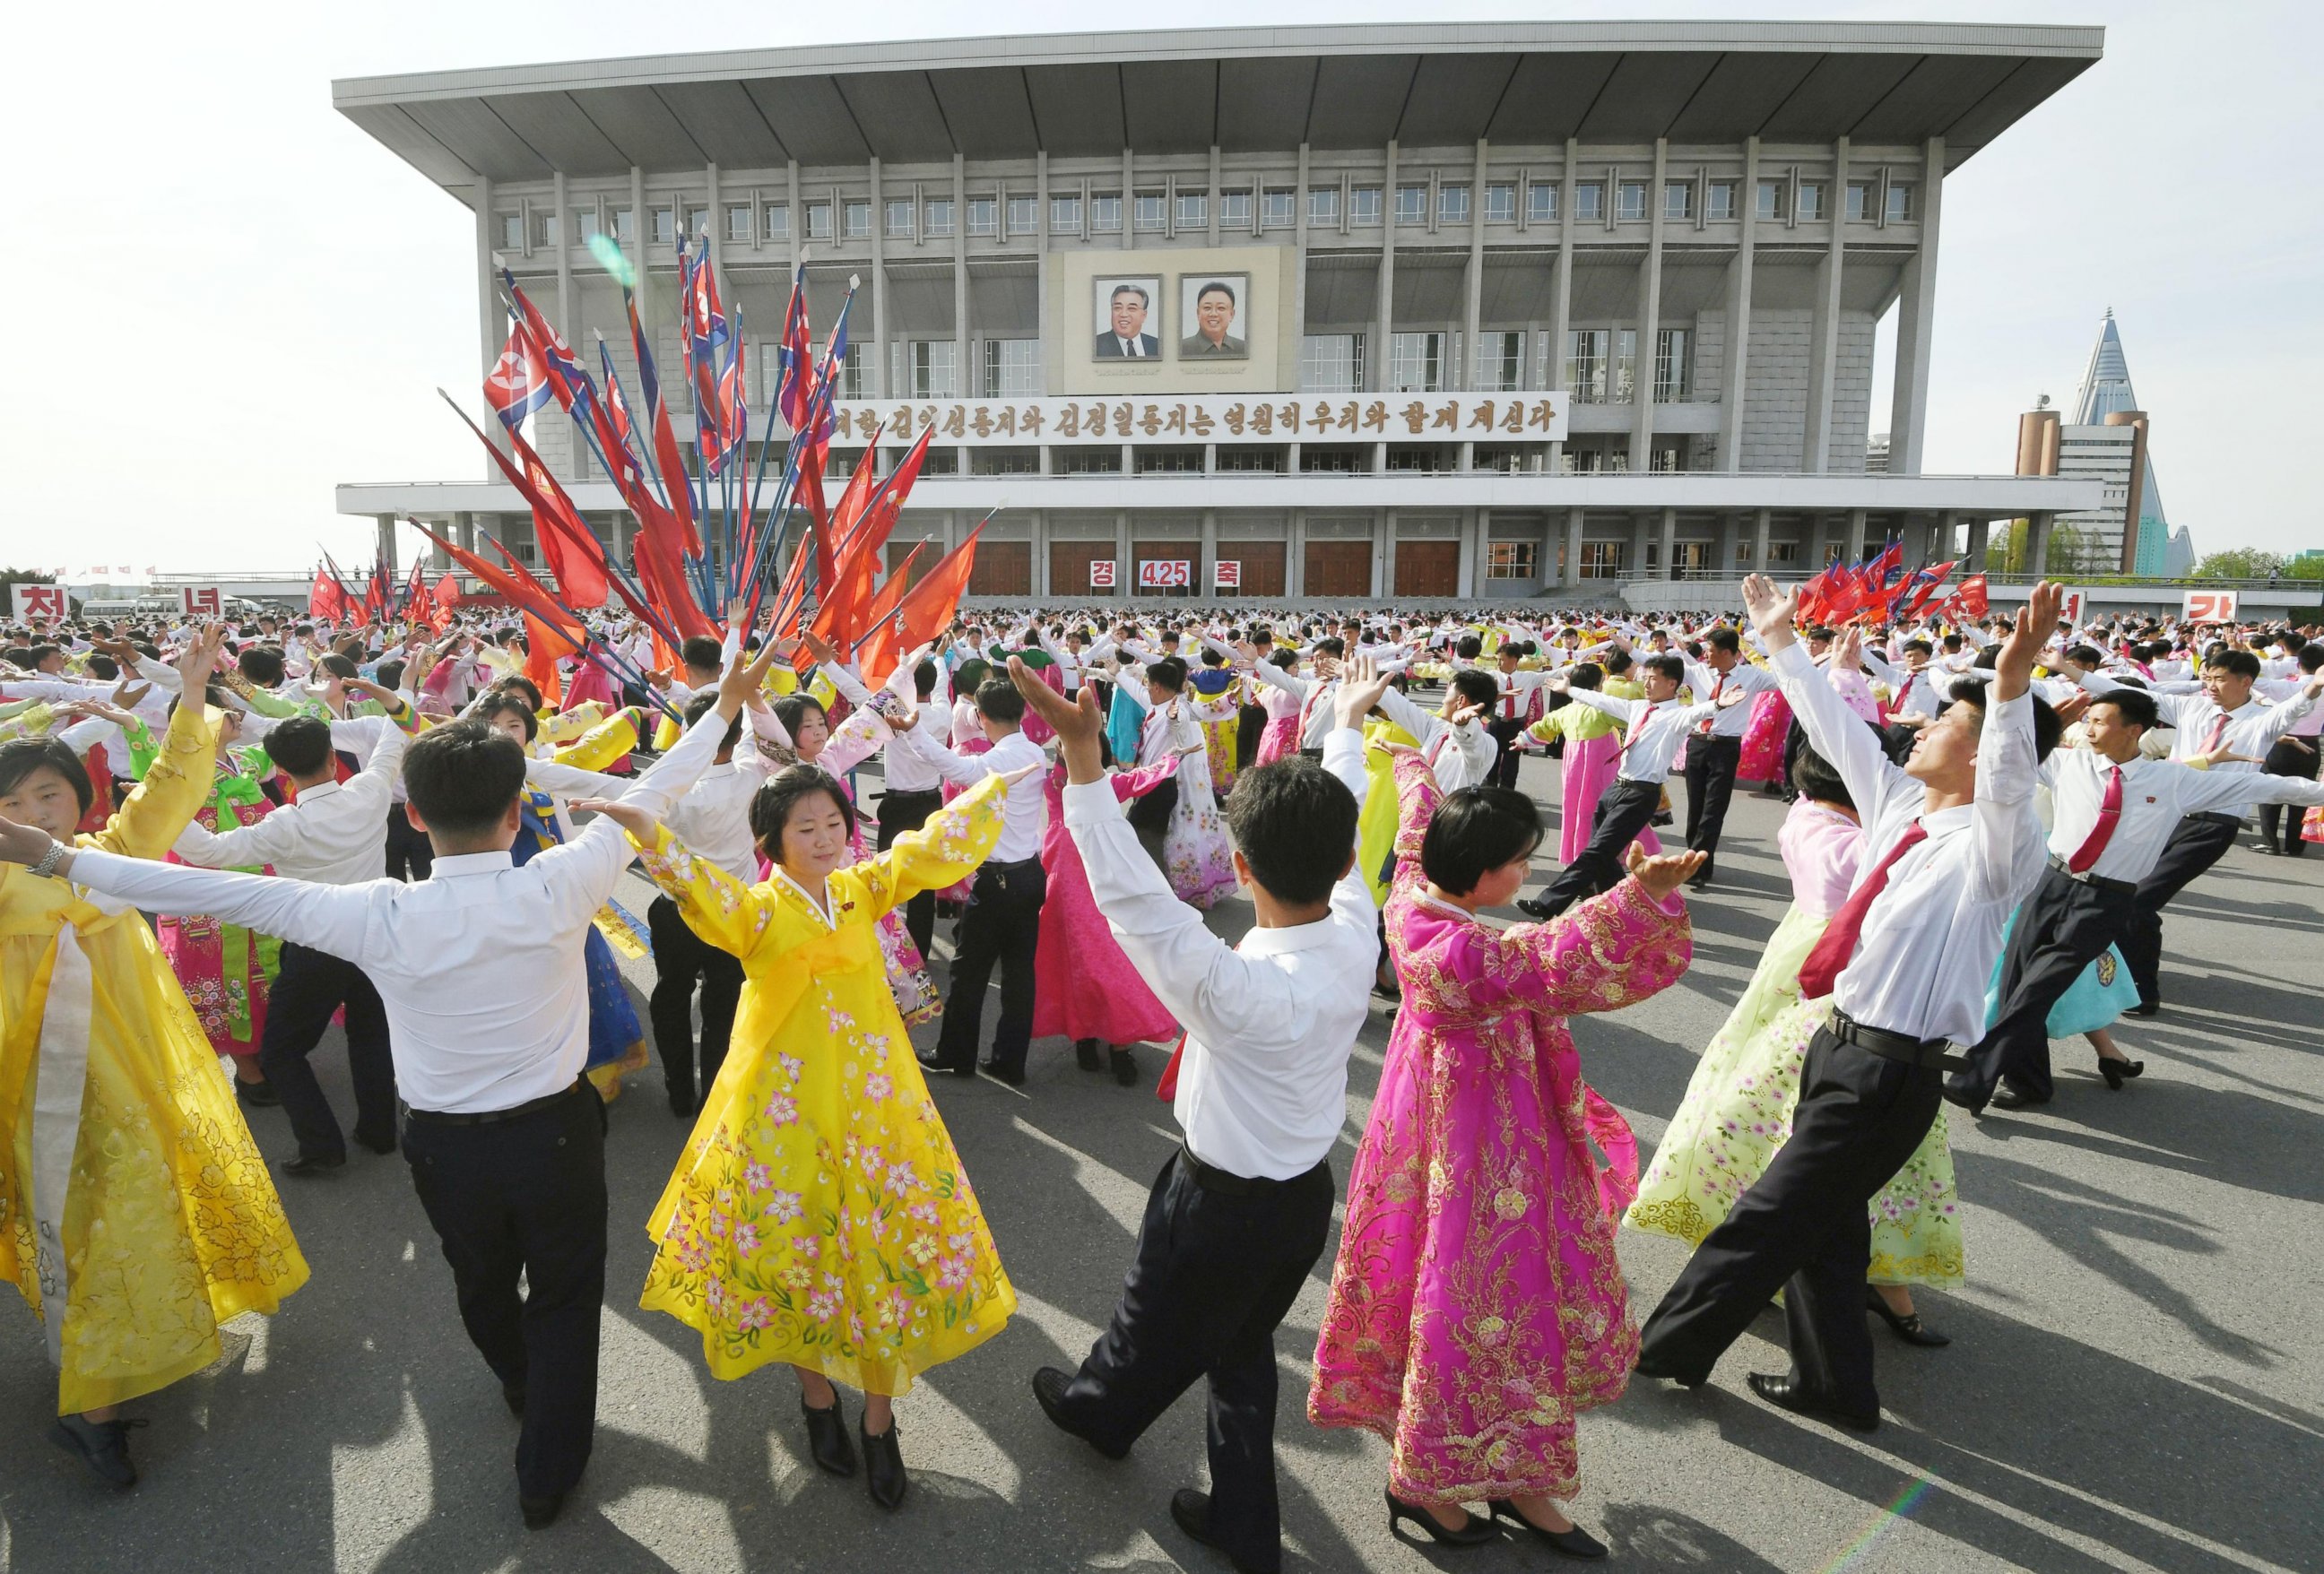 PHOTO: People dance at an outdoor party in North Korea's capital Pyongyang, on April 25, 2017, to mark the 85th anniversary of the founding of the country's armed forces. 